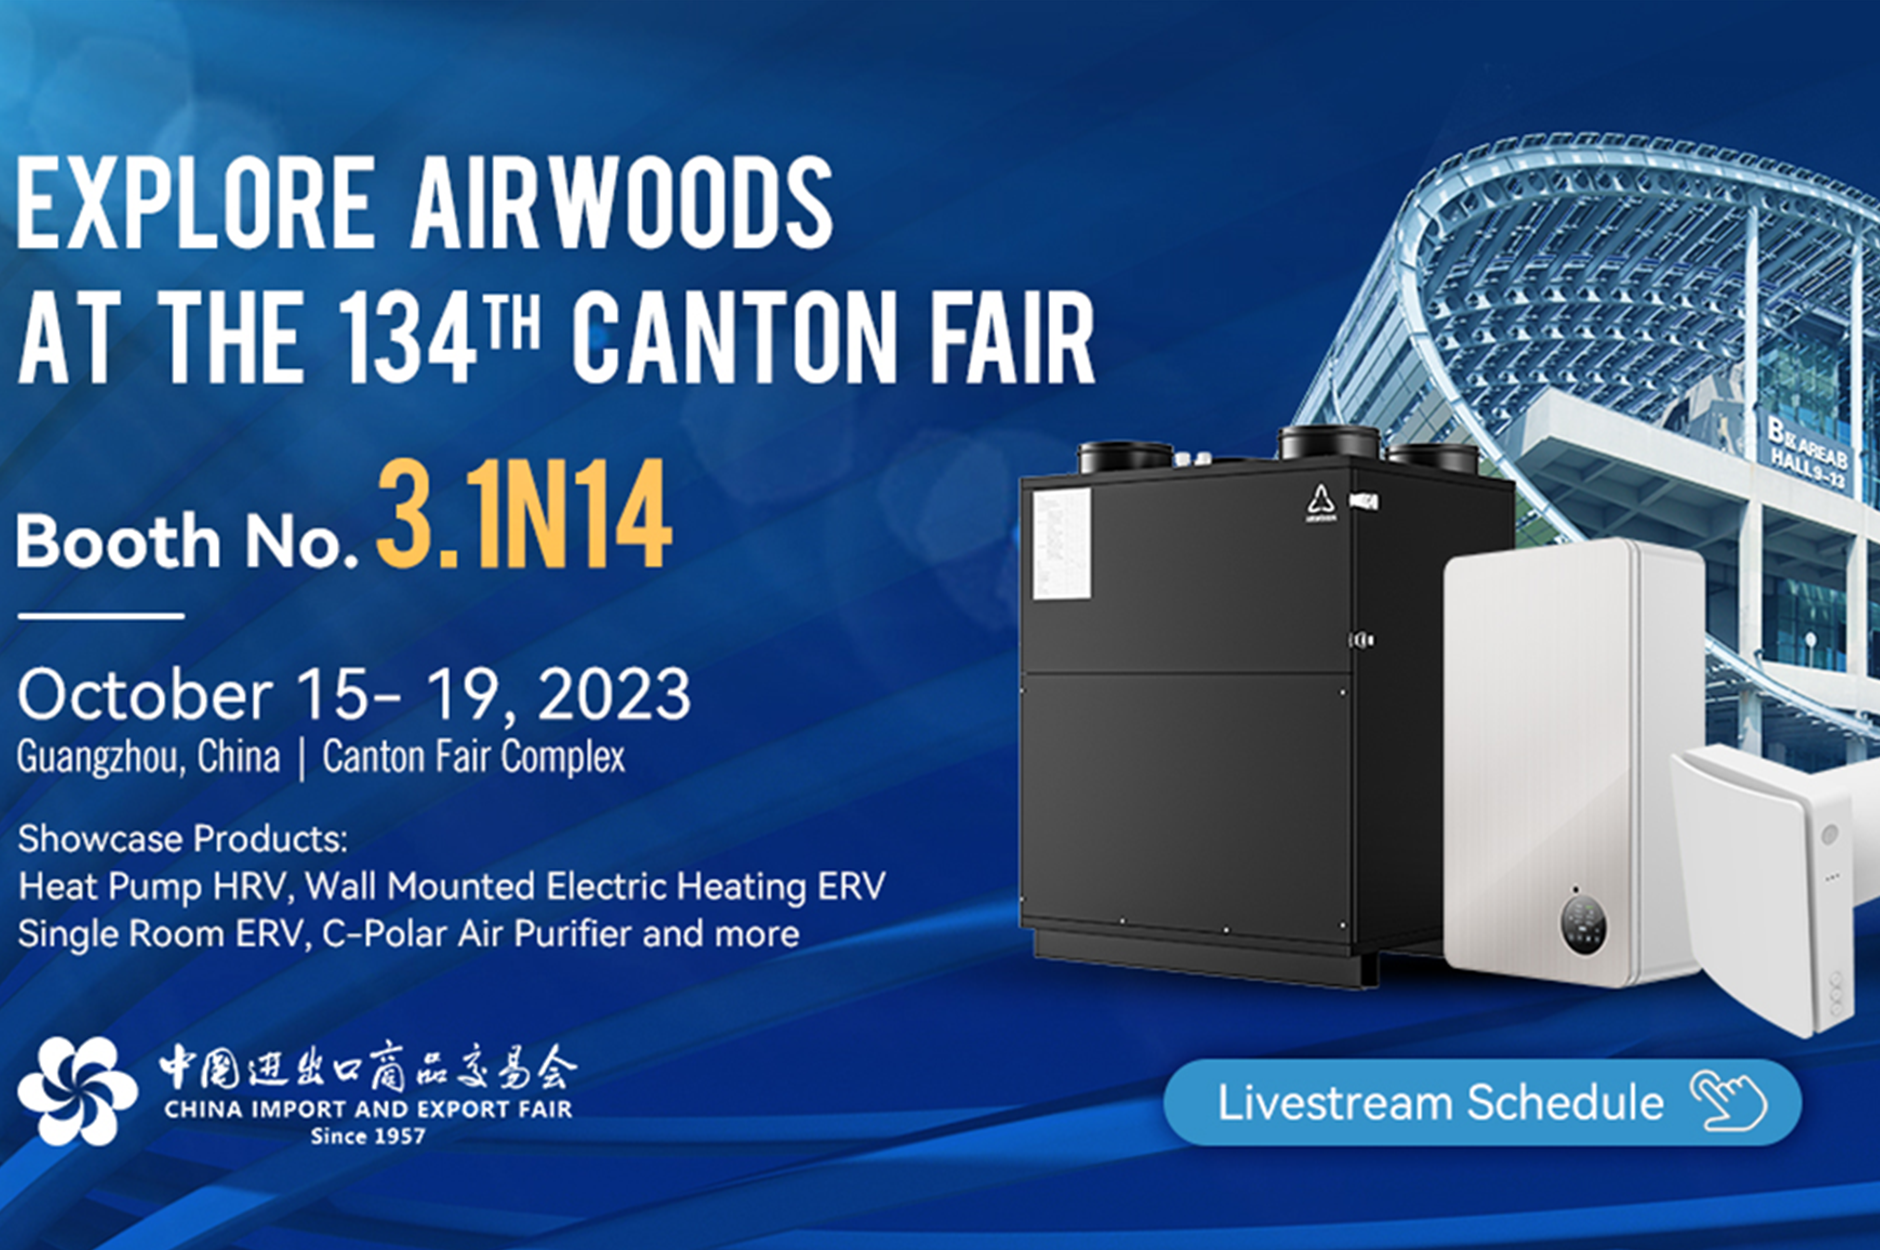 Airwoods at Canton Fair: Booth 3.1N14 & Enjoy Guangzhou’s Visa-Free Entry!